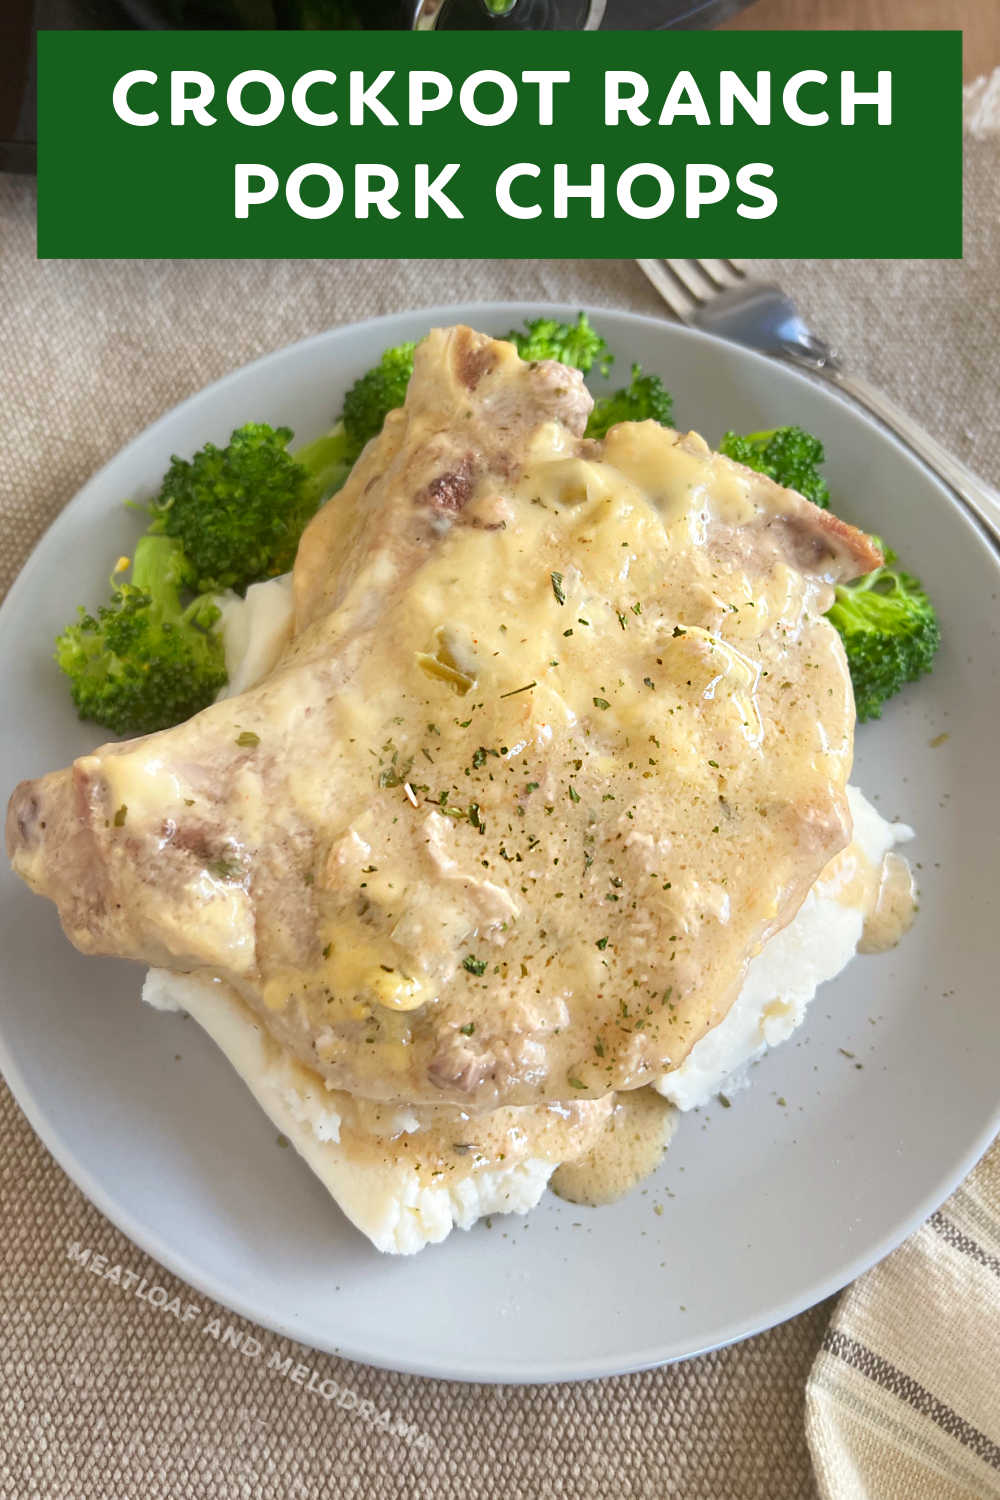 This Crockpot Ranch Pork Chops recipe uses bone-in pork chops and a few simple ingredients to make tender pork chops in the slow cooker. Your whole family will love this easy slow cooker recipe! via @meamel